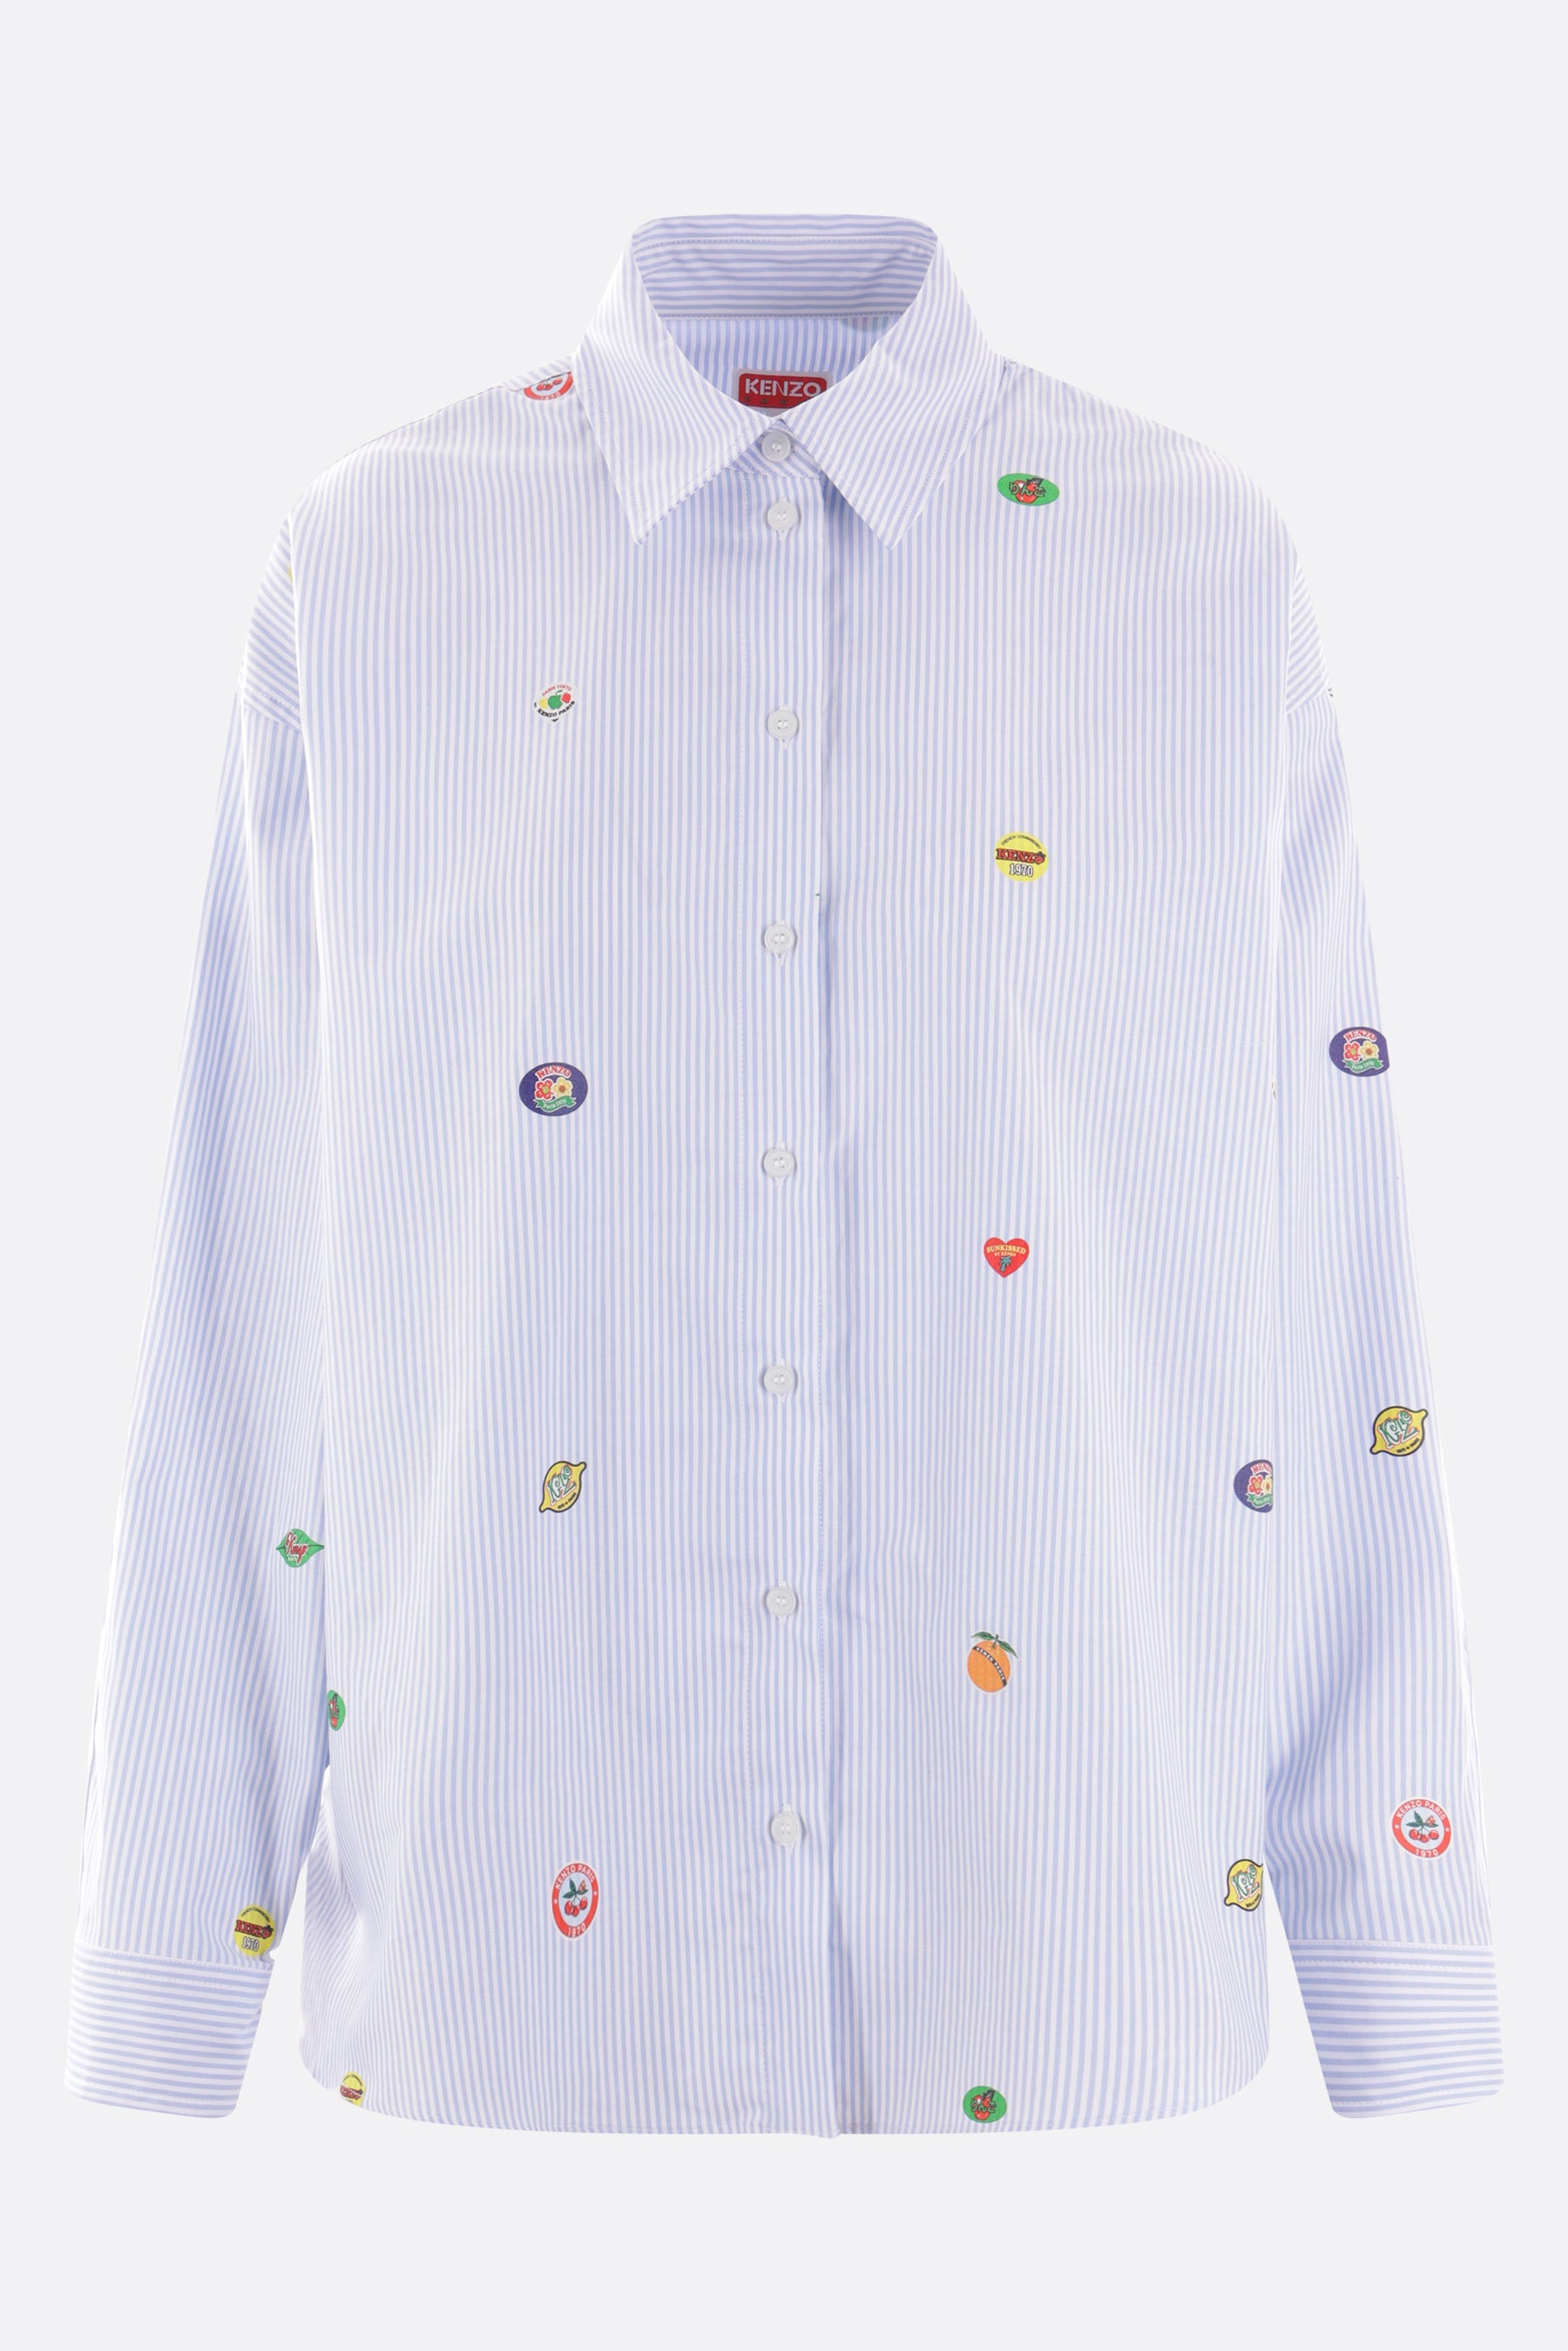 cotton shirt with Fruit Stickers prints